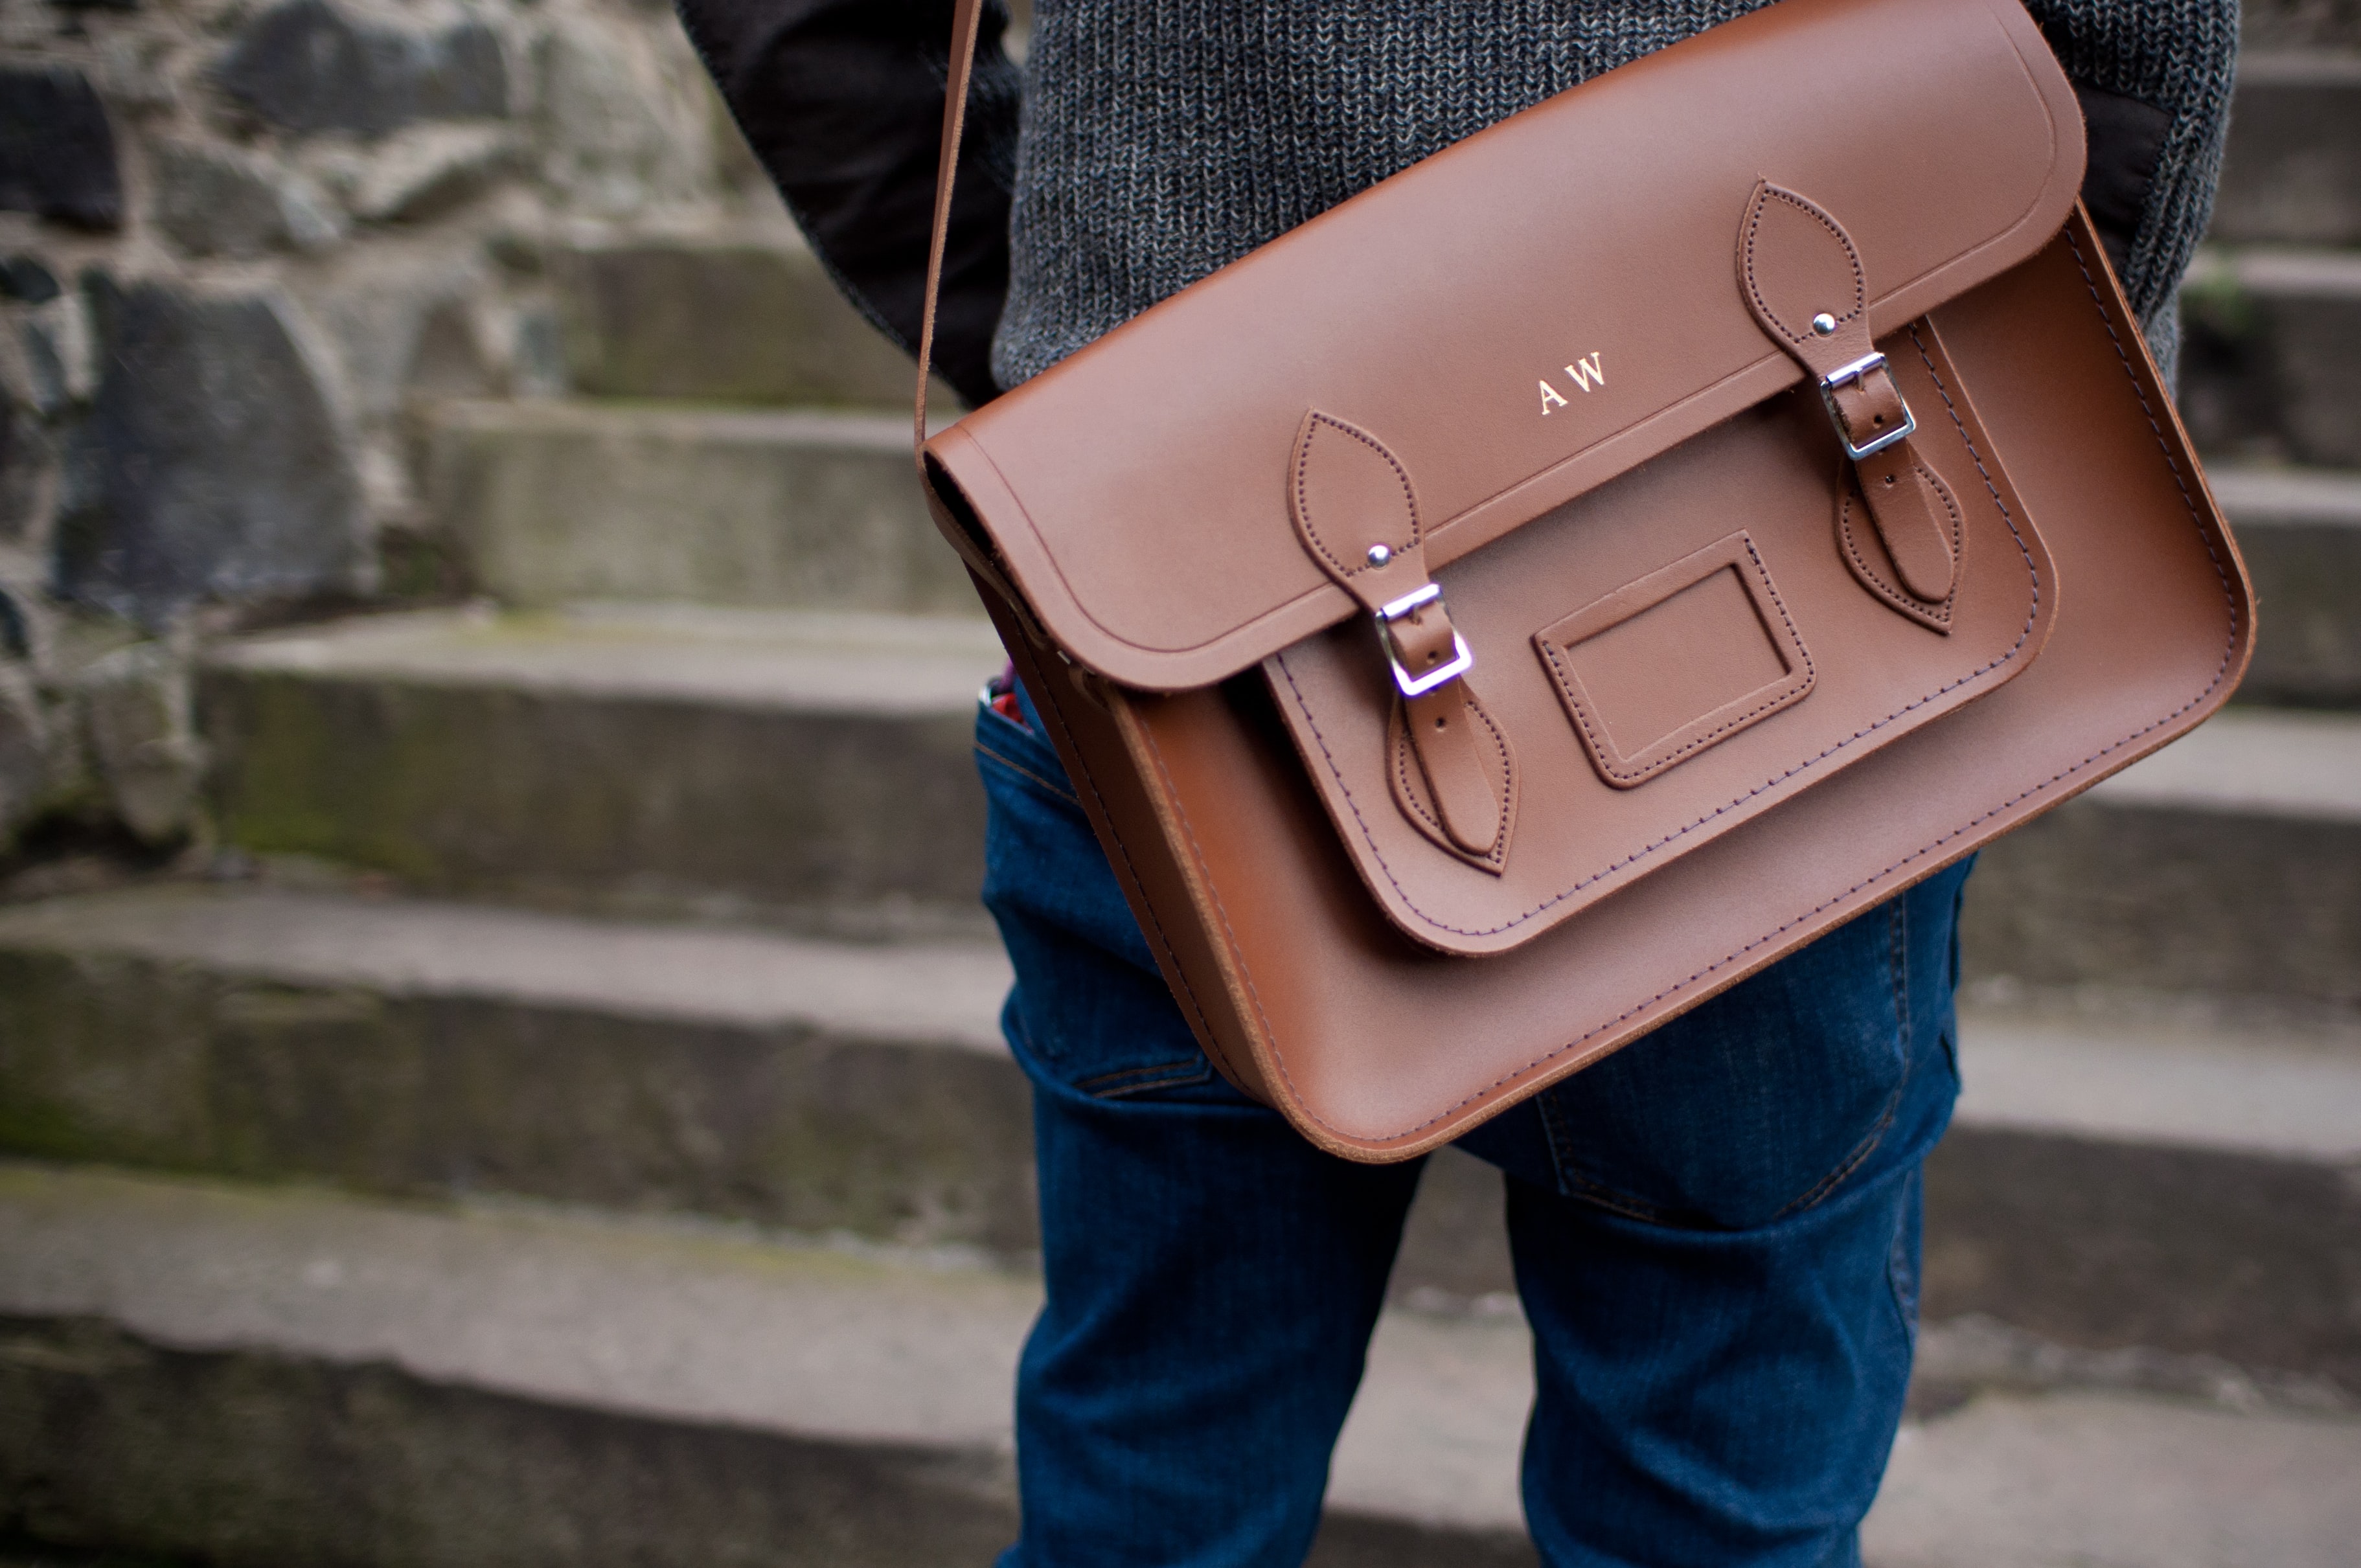 The Making Of: The Cambridge Satchel